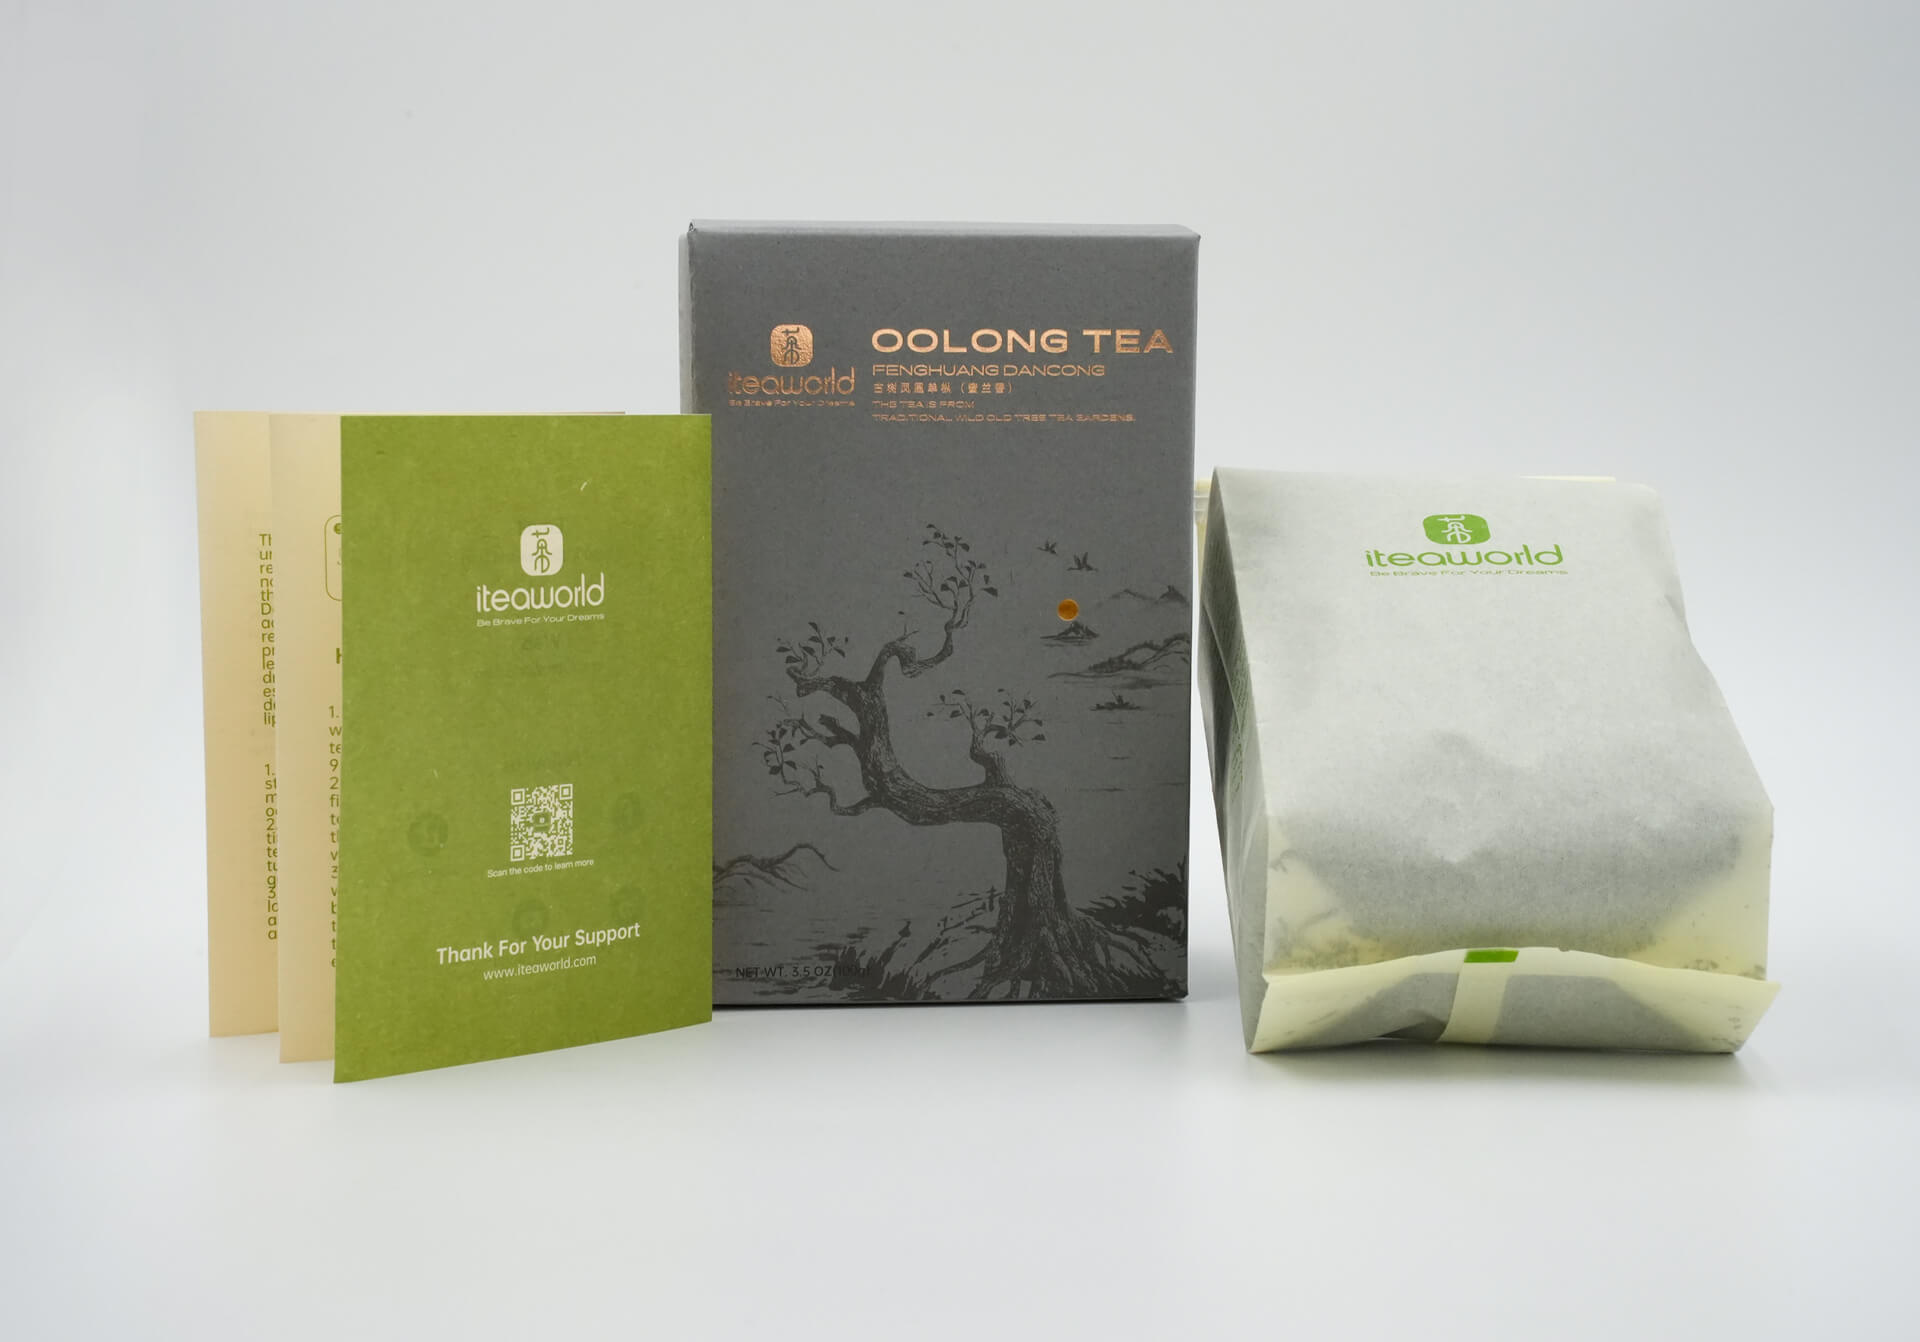 Product-Packaging-Adhering-to-Sustainability